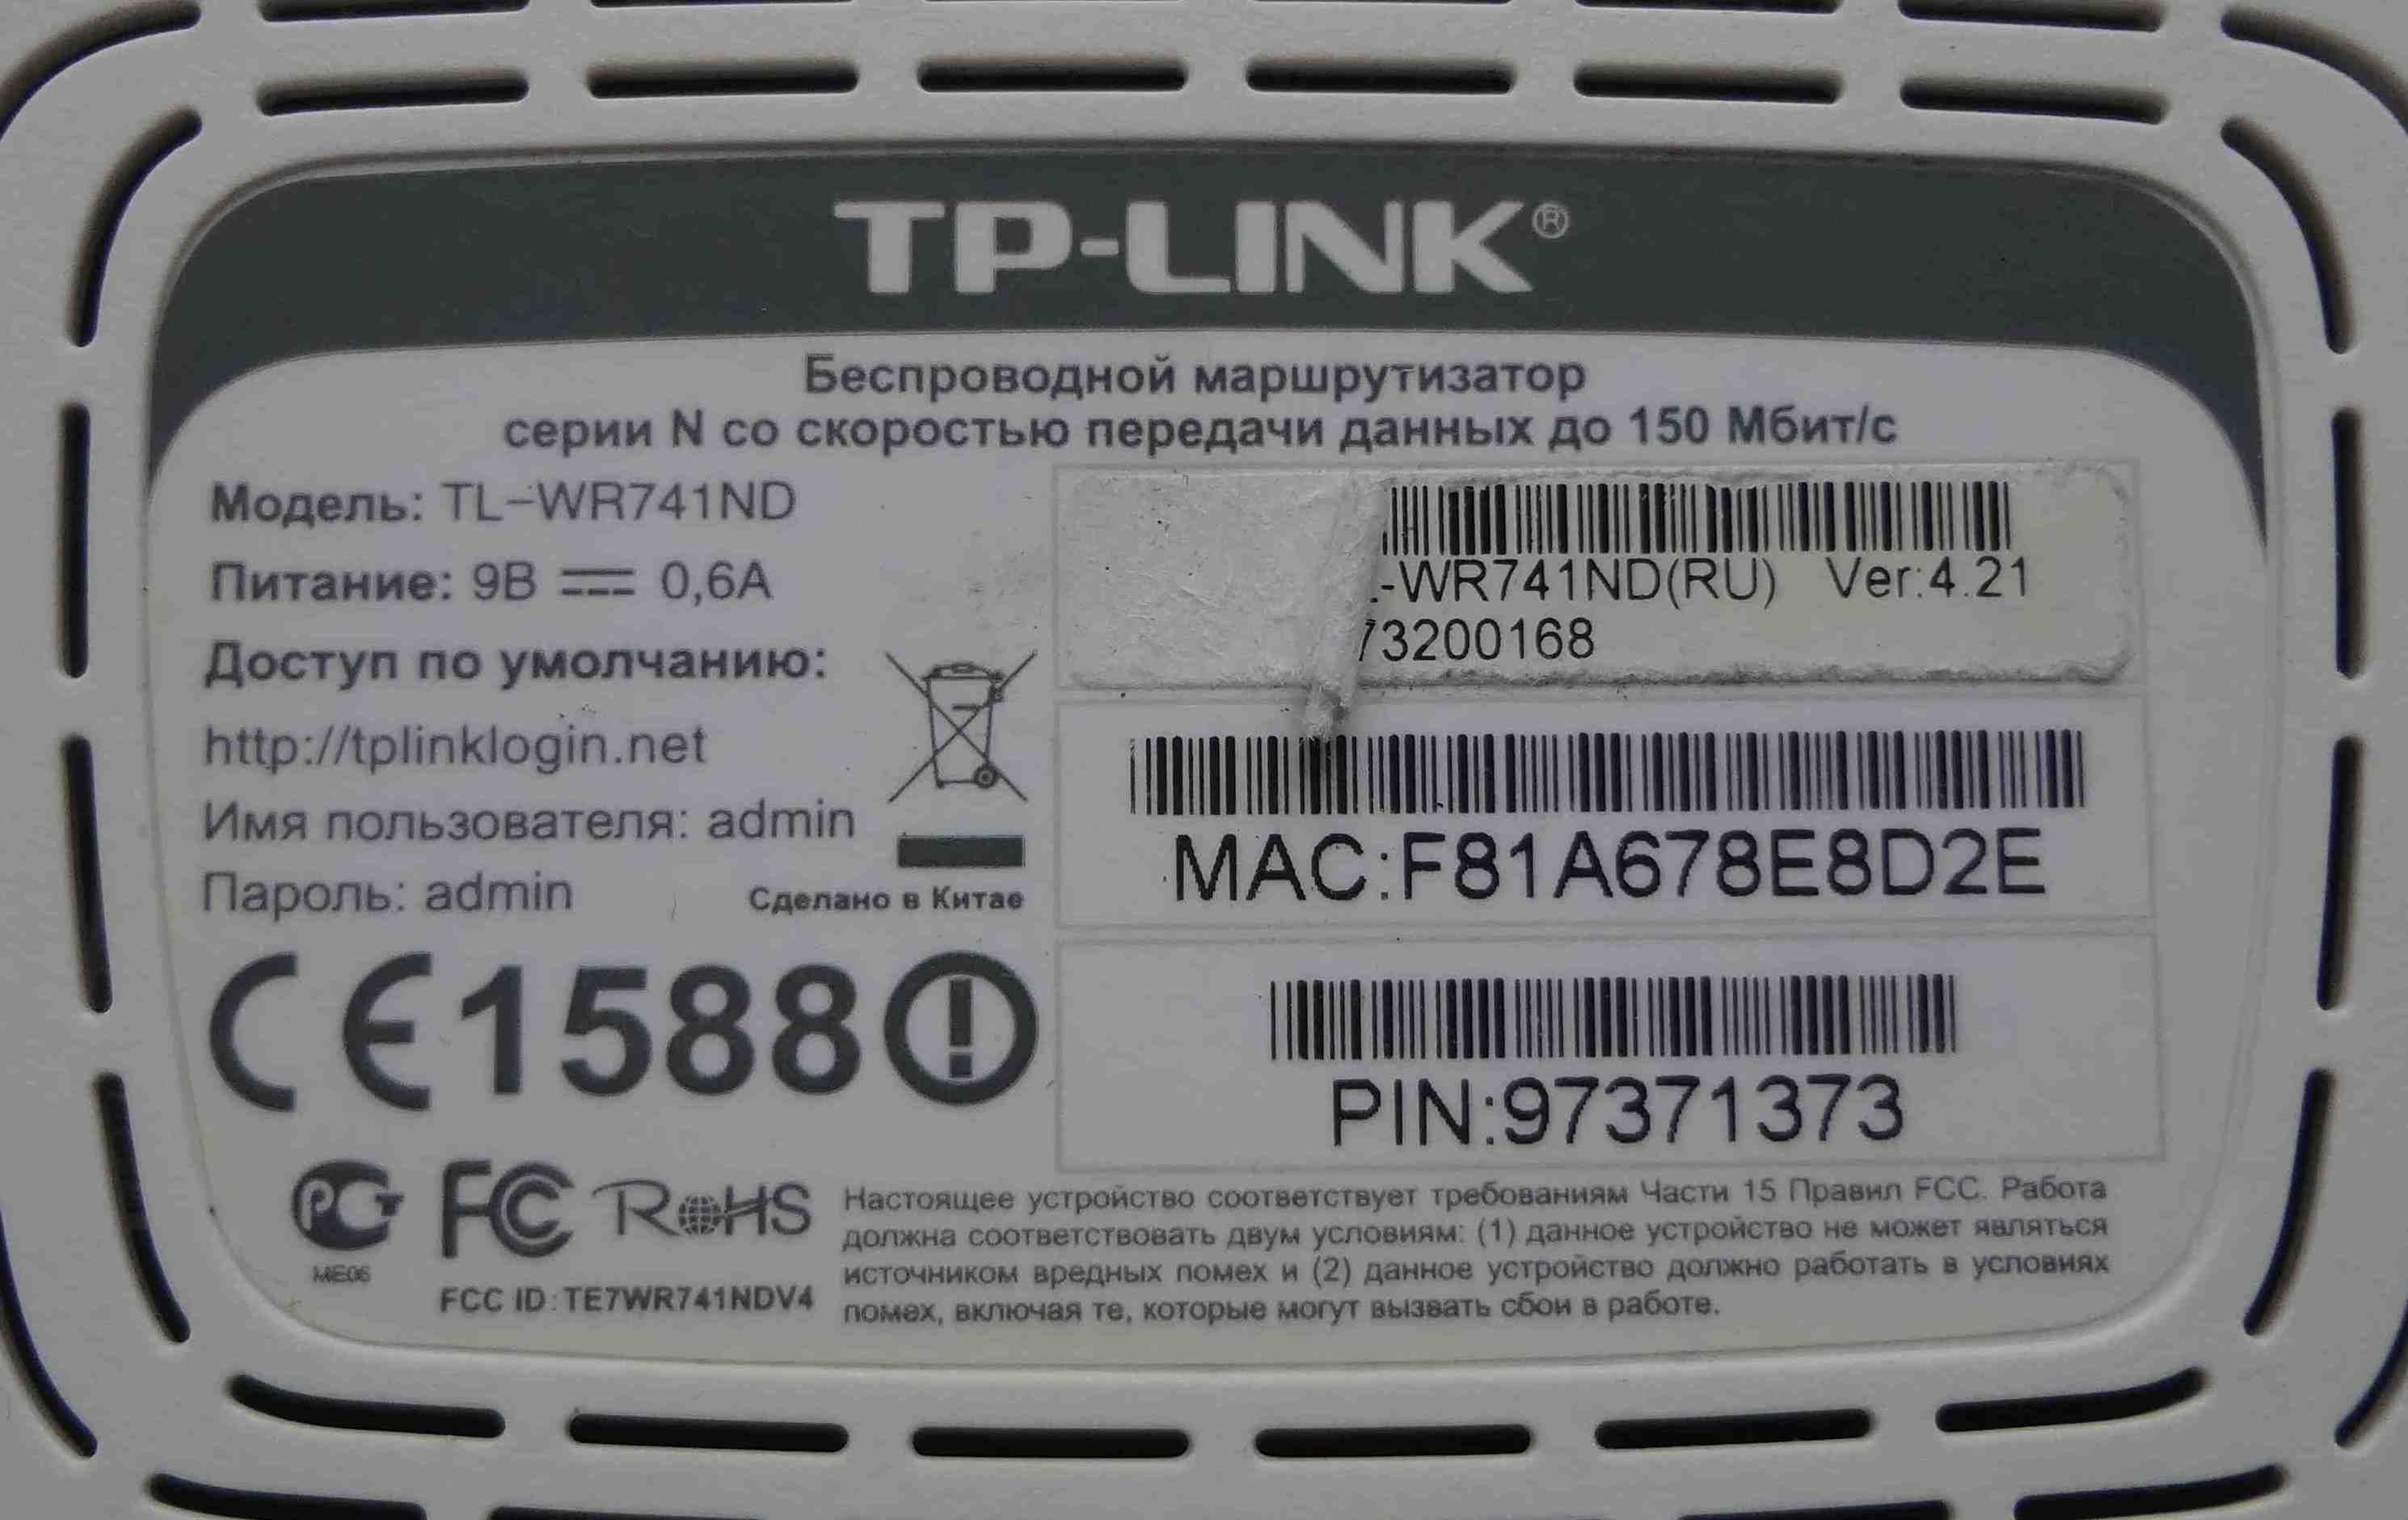 Wi-Fi роутер Маршрутизатор TP-LINK TL-WR741ND